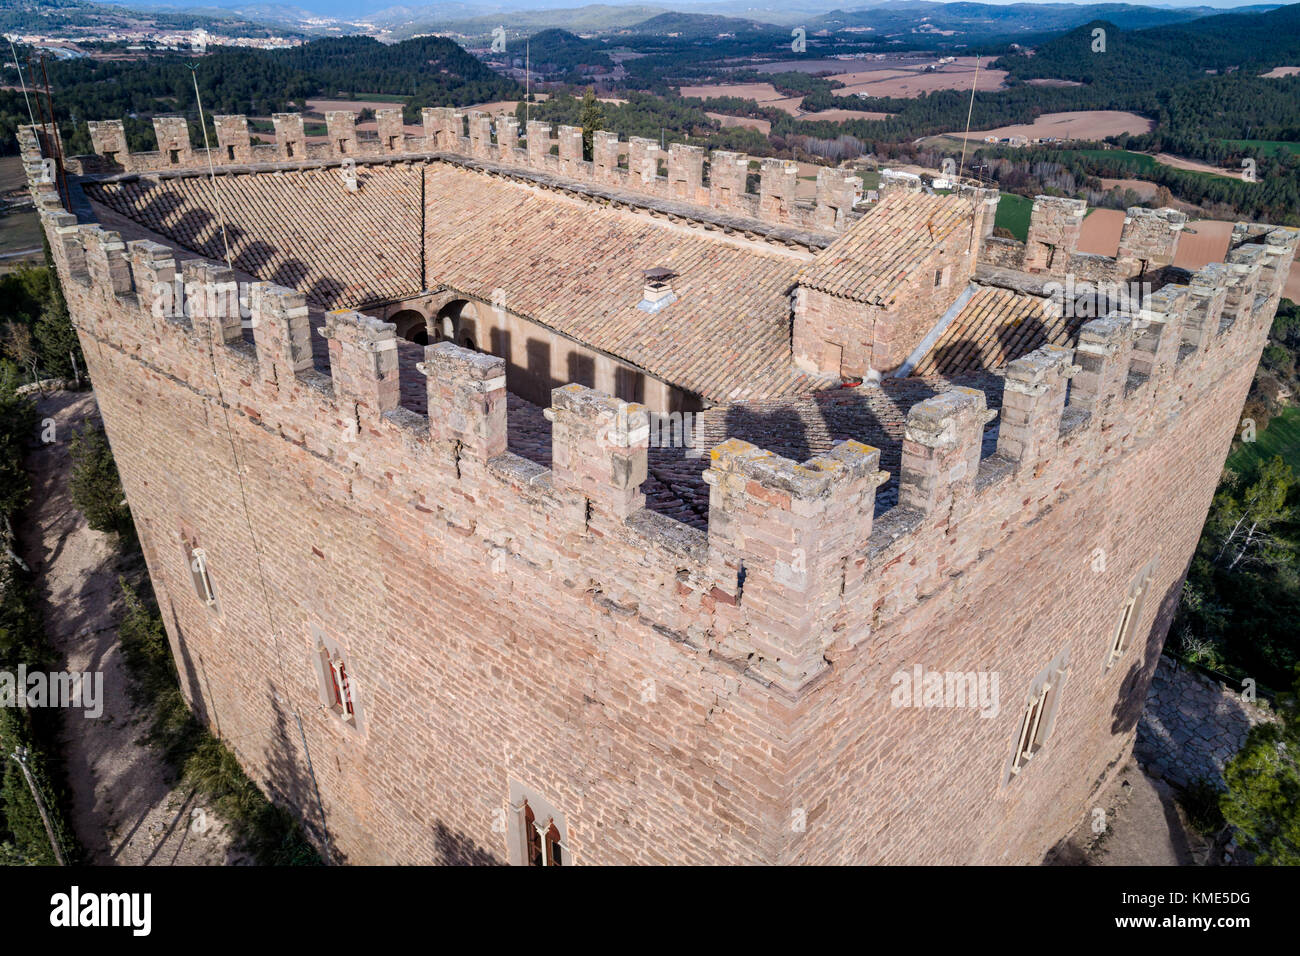 Aerial view of Balsareny castle, gothic style fortress dated in 931 and located above a hill in the city of Balsareny, Catalonia Stock Photo